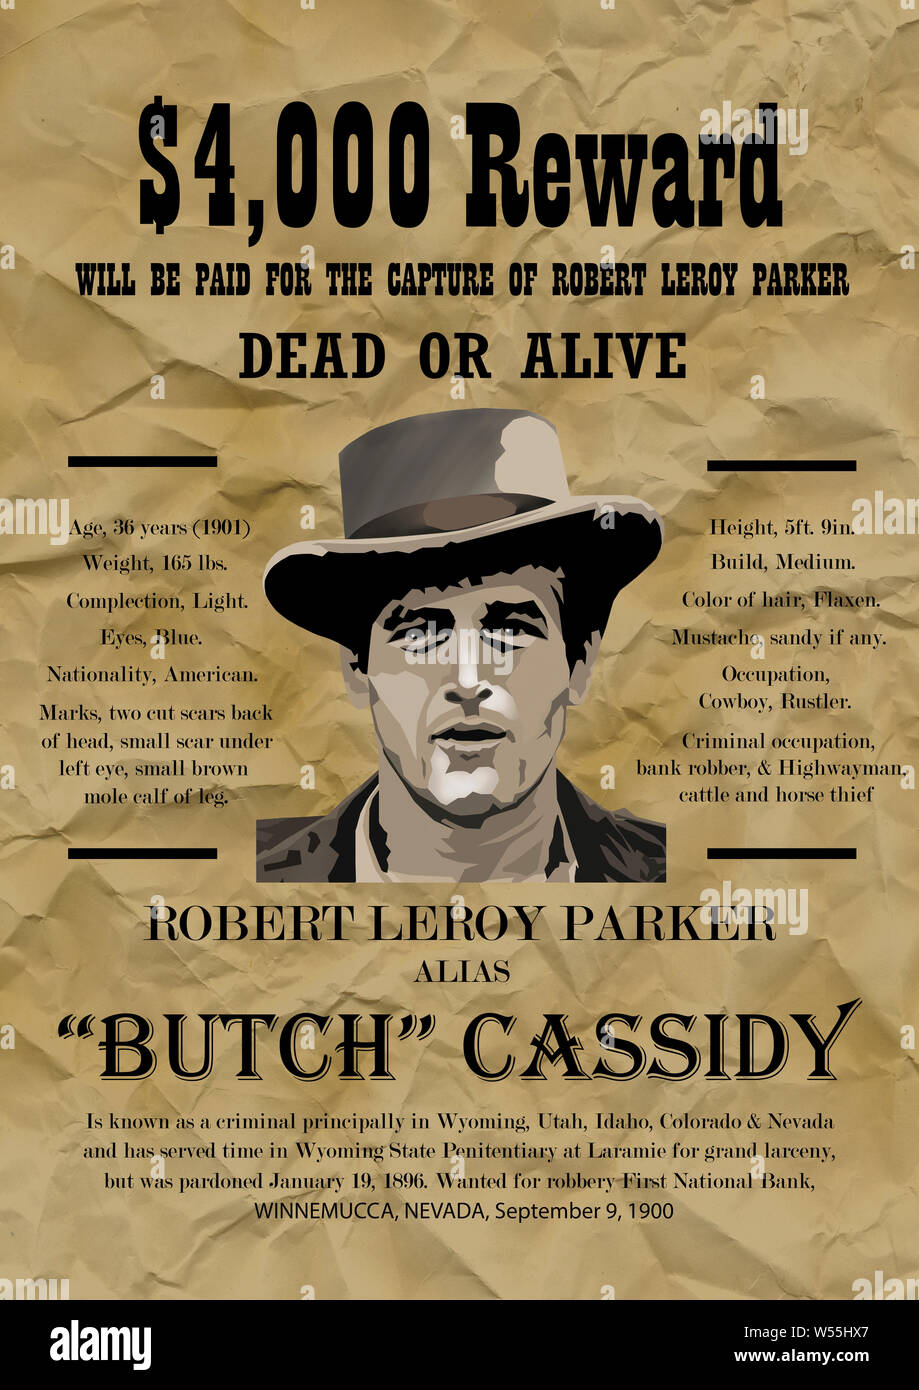 Butch Cassidy manifesto wanted. Foto Stock